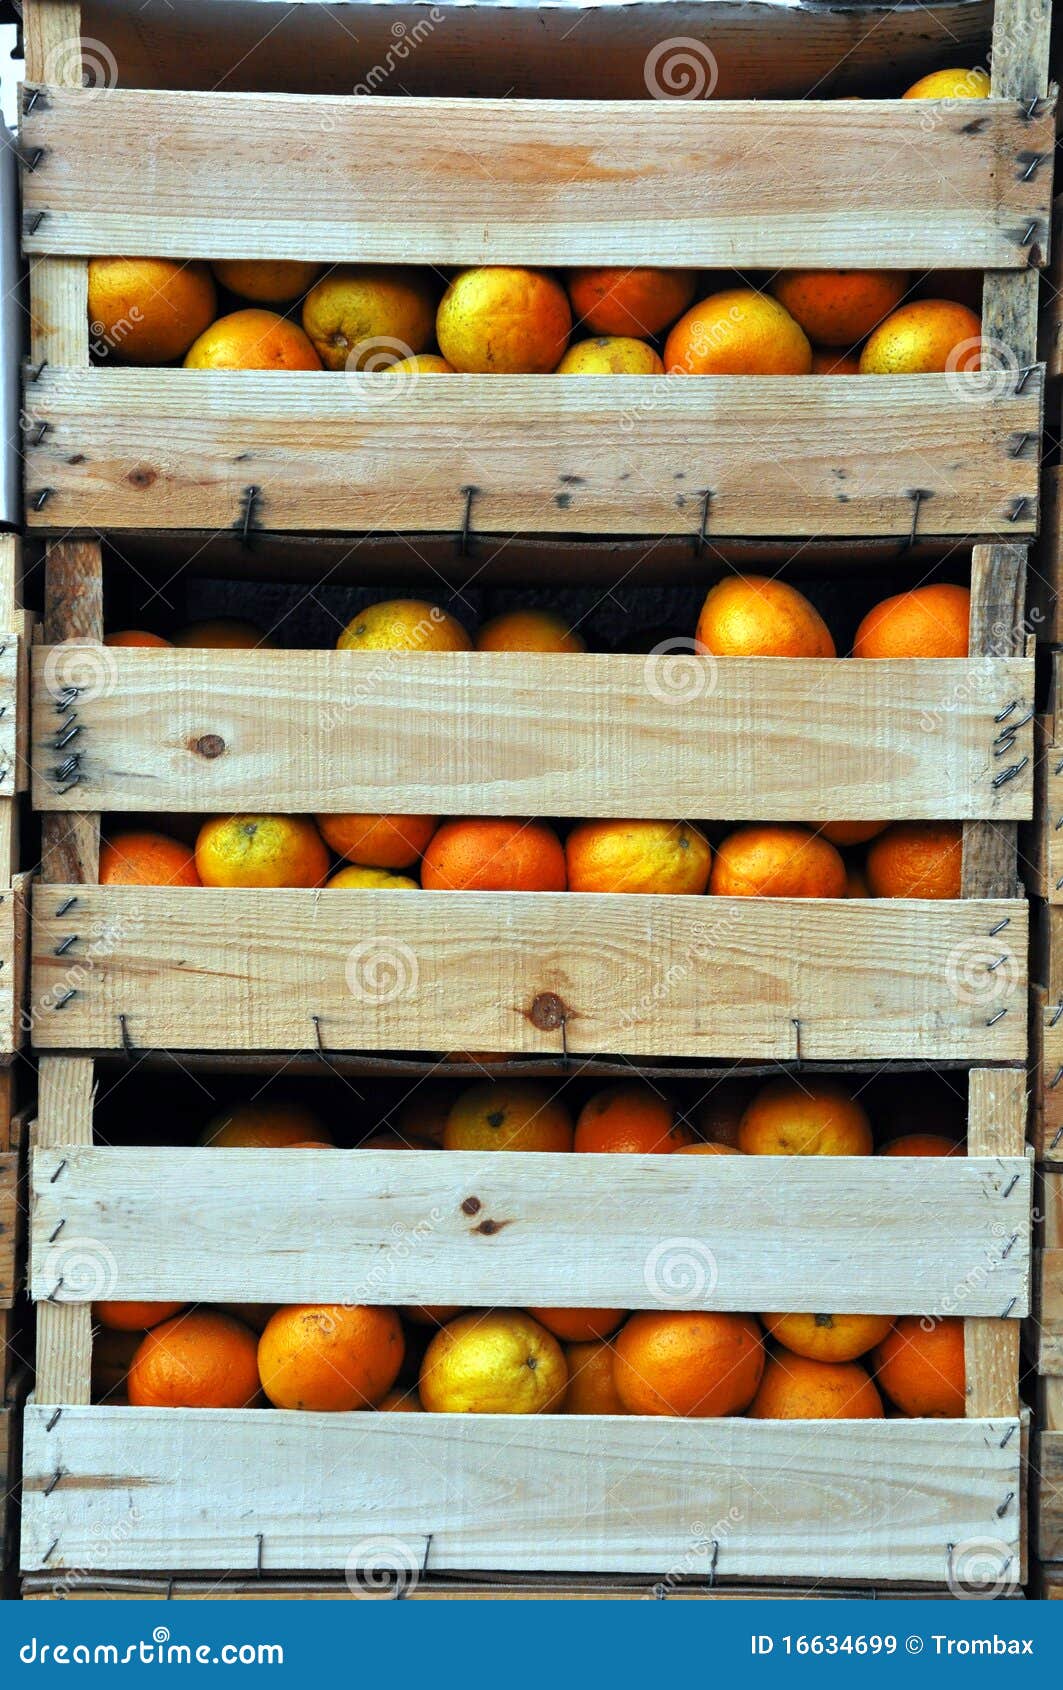 wooden crates with oranges